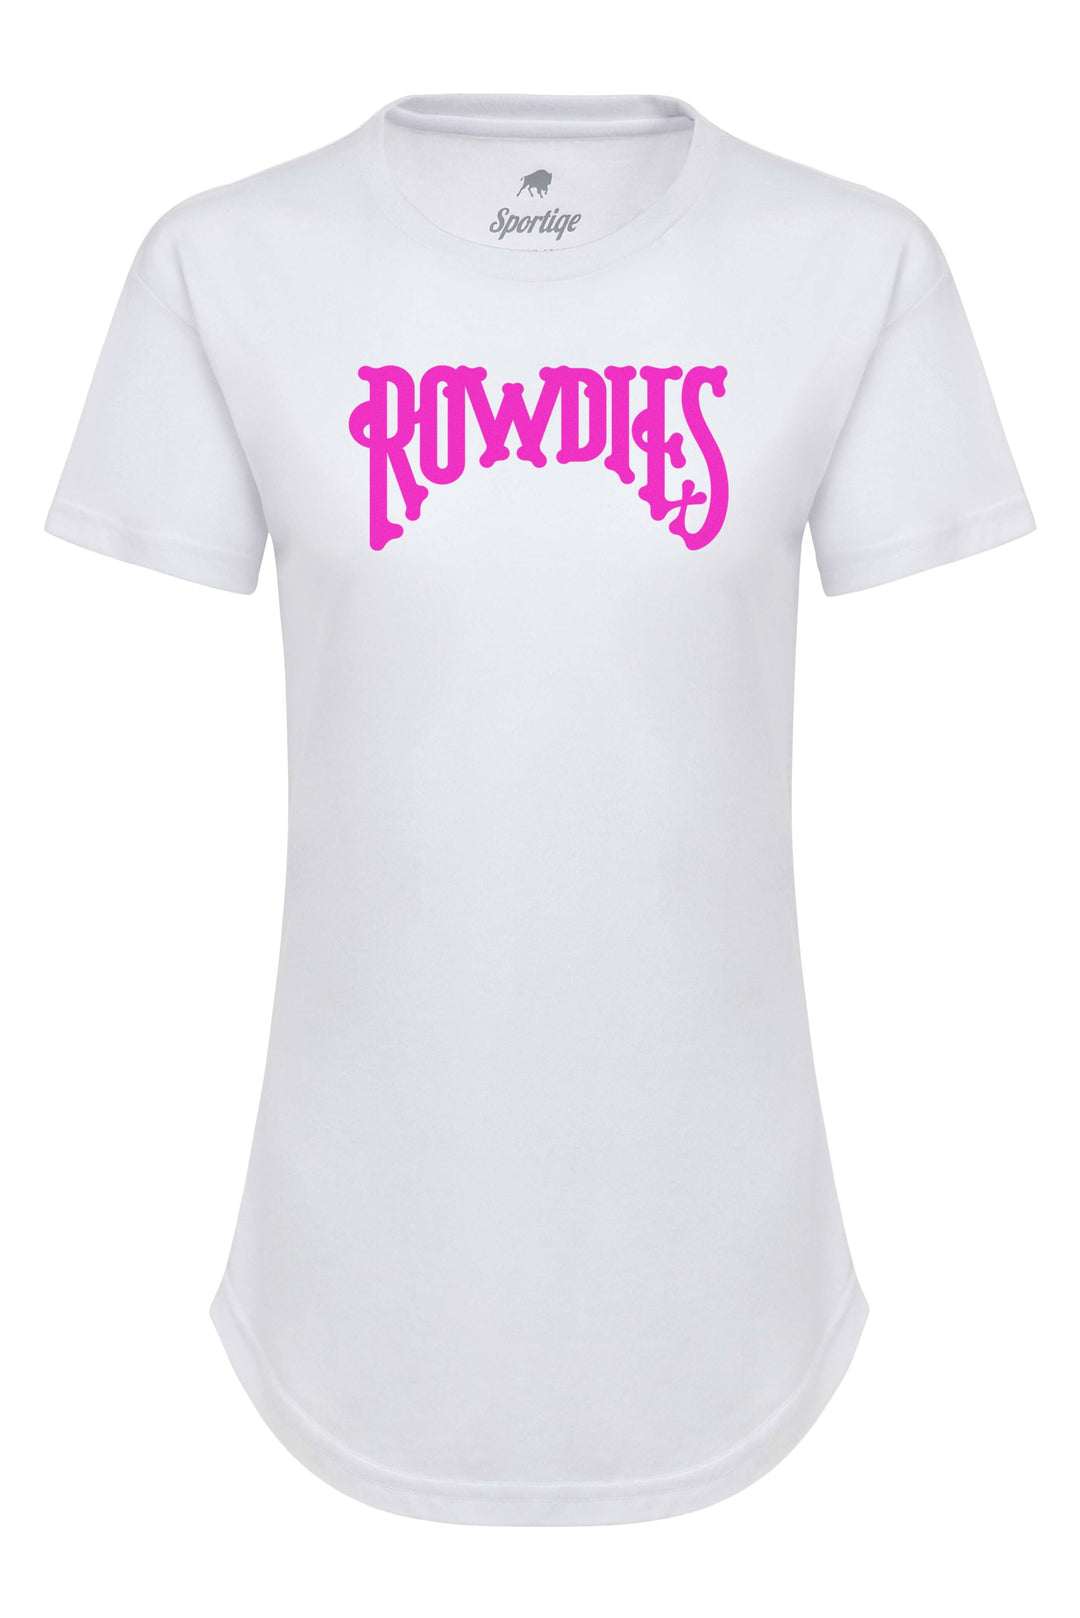 Rowdies Women's Sportiqe White Neon Pink T-Shirt - The Bay Republic | Team Store of the Tampa Bay Rays & Rowdies